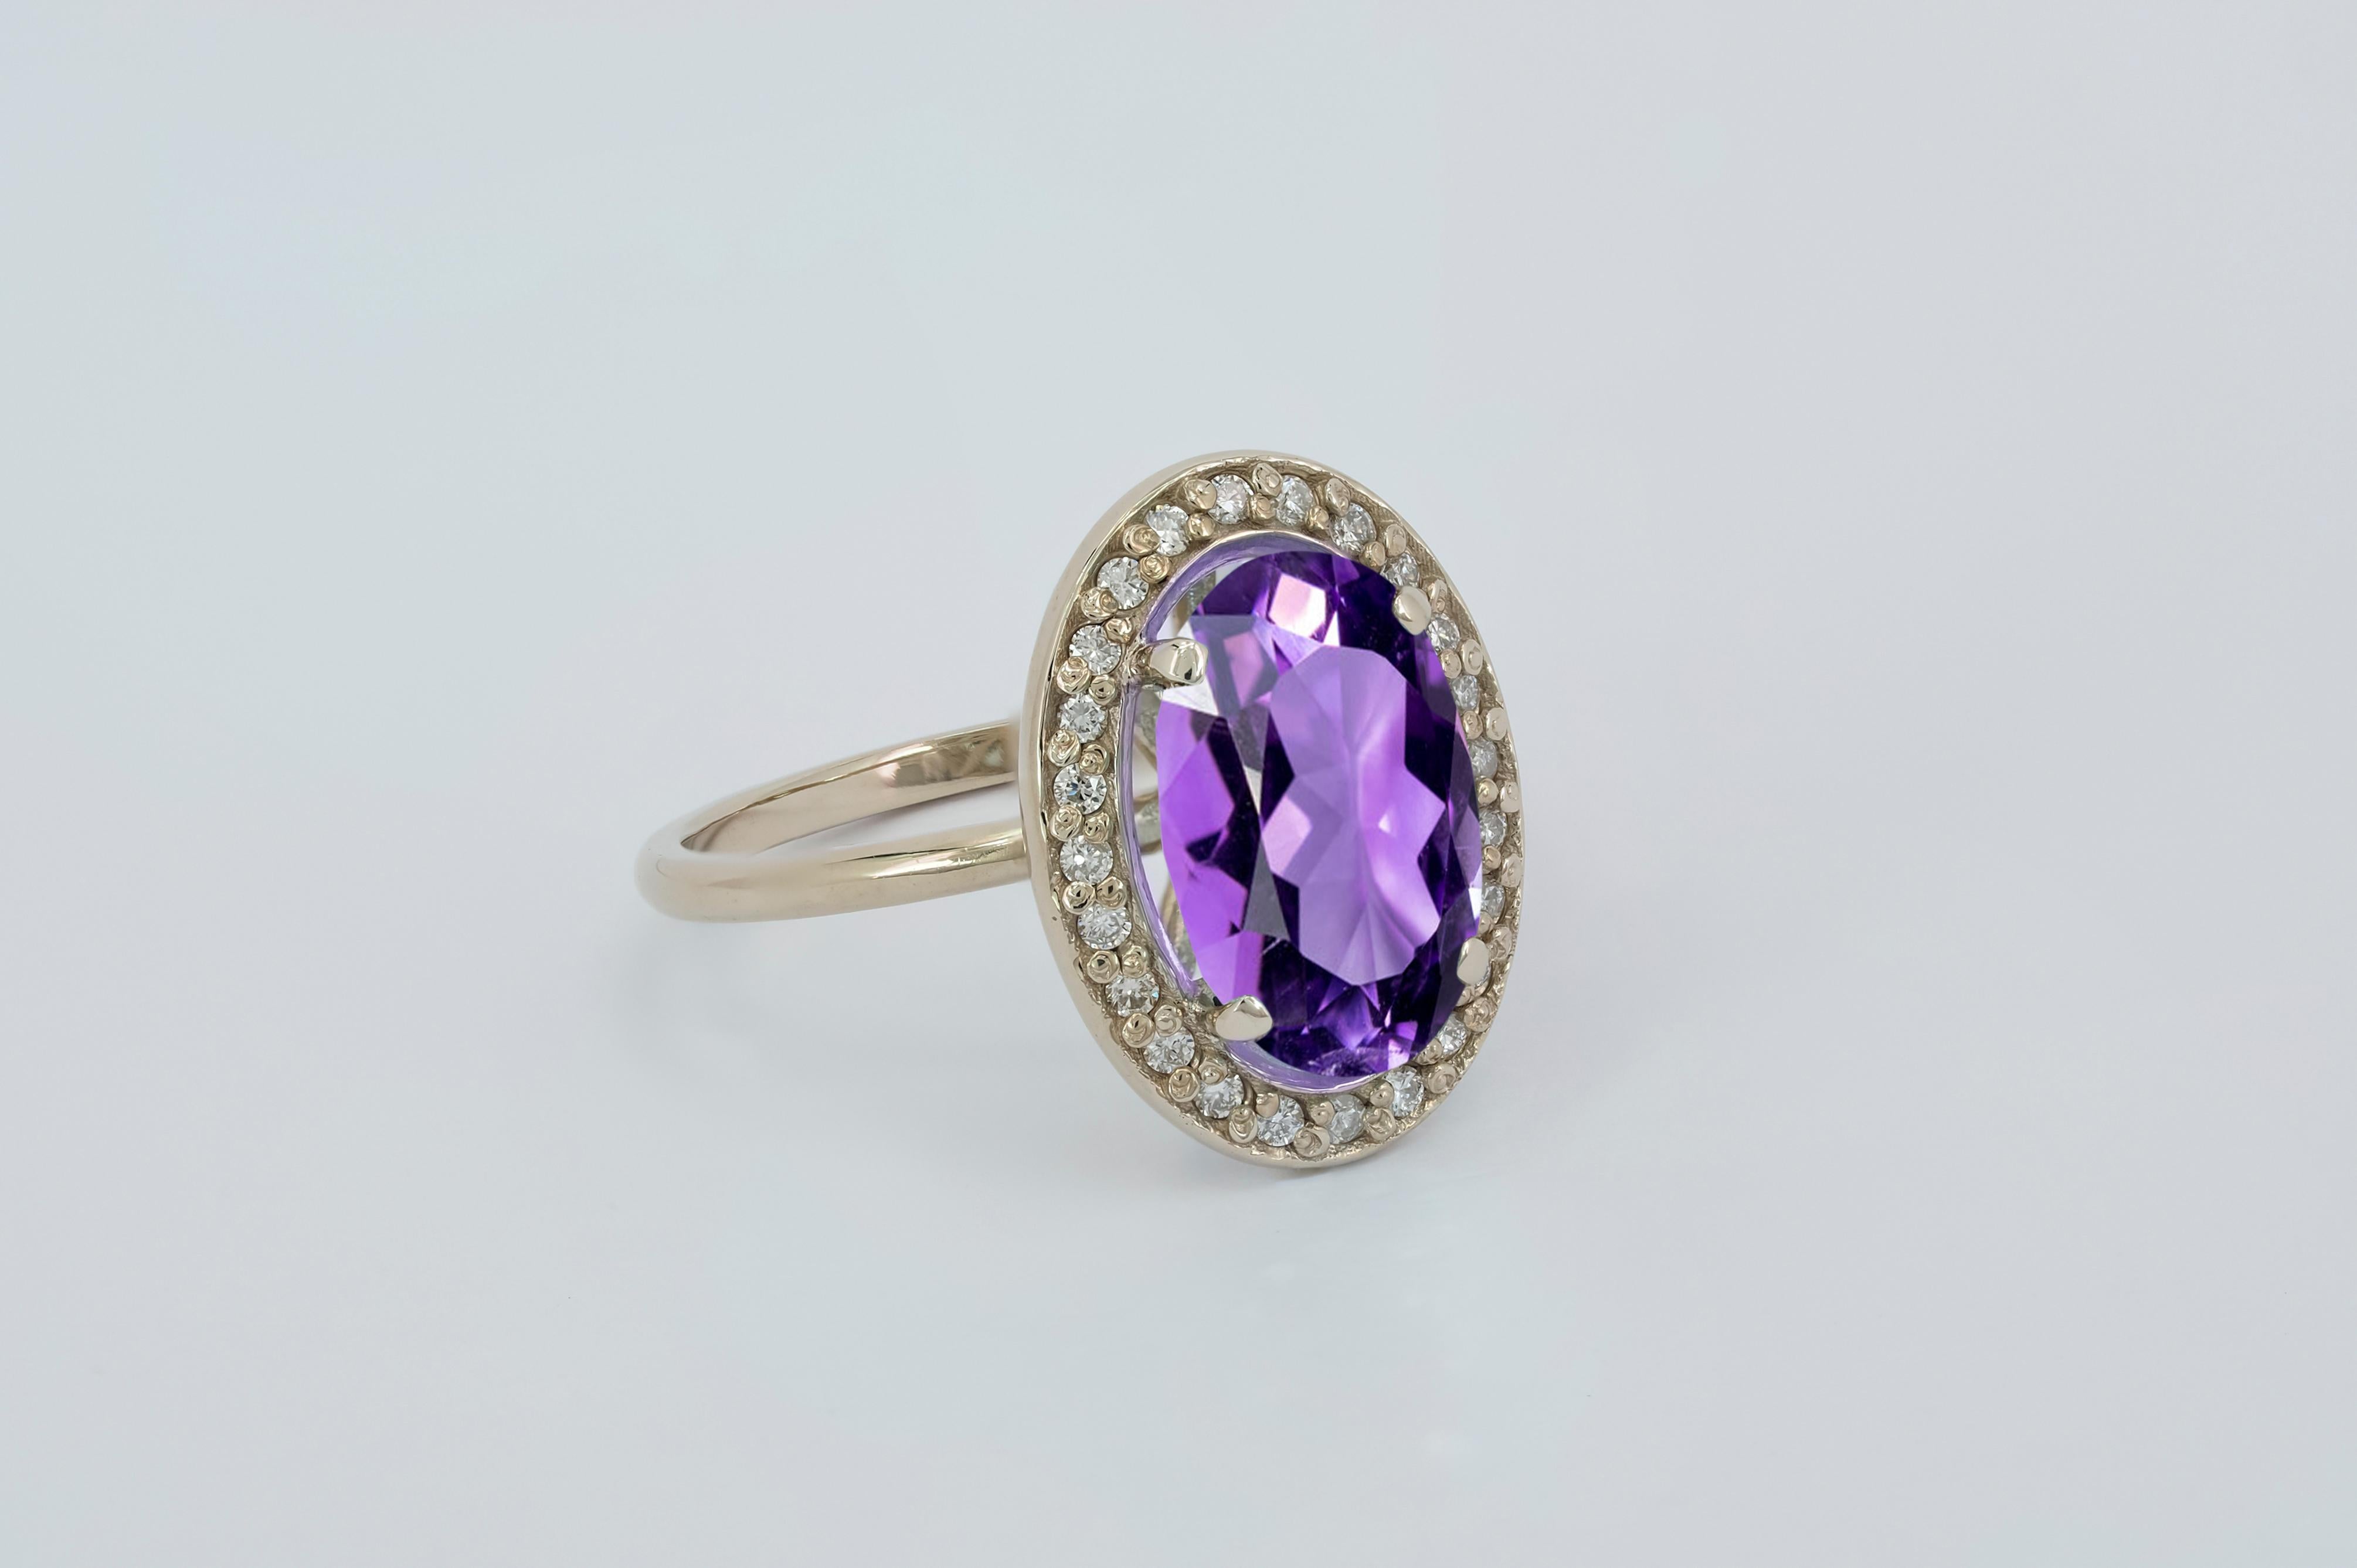 For Sale:  Amethyst and diamonds 14k gold ring. 4